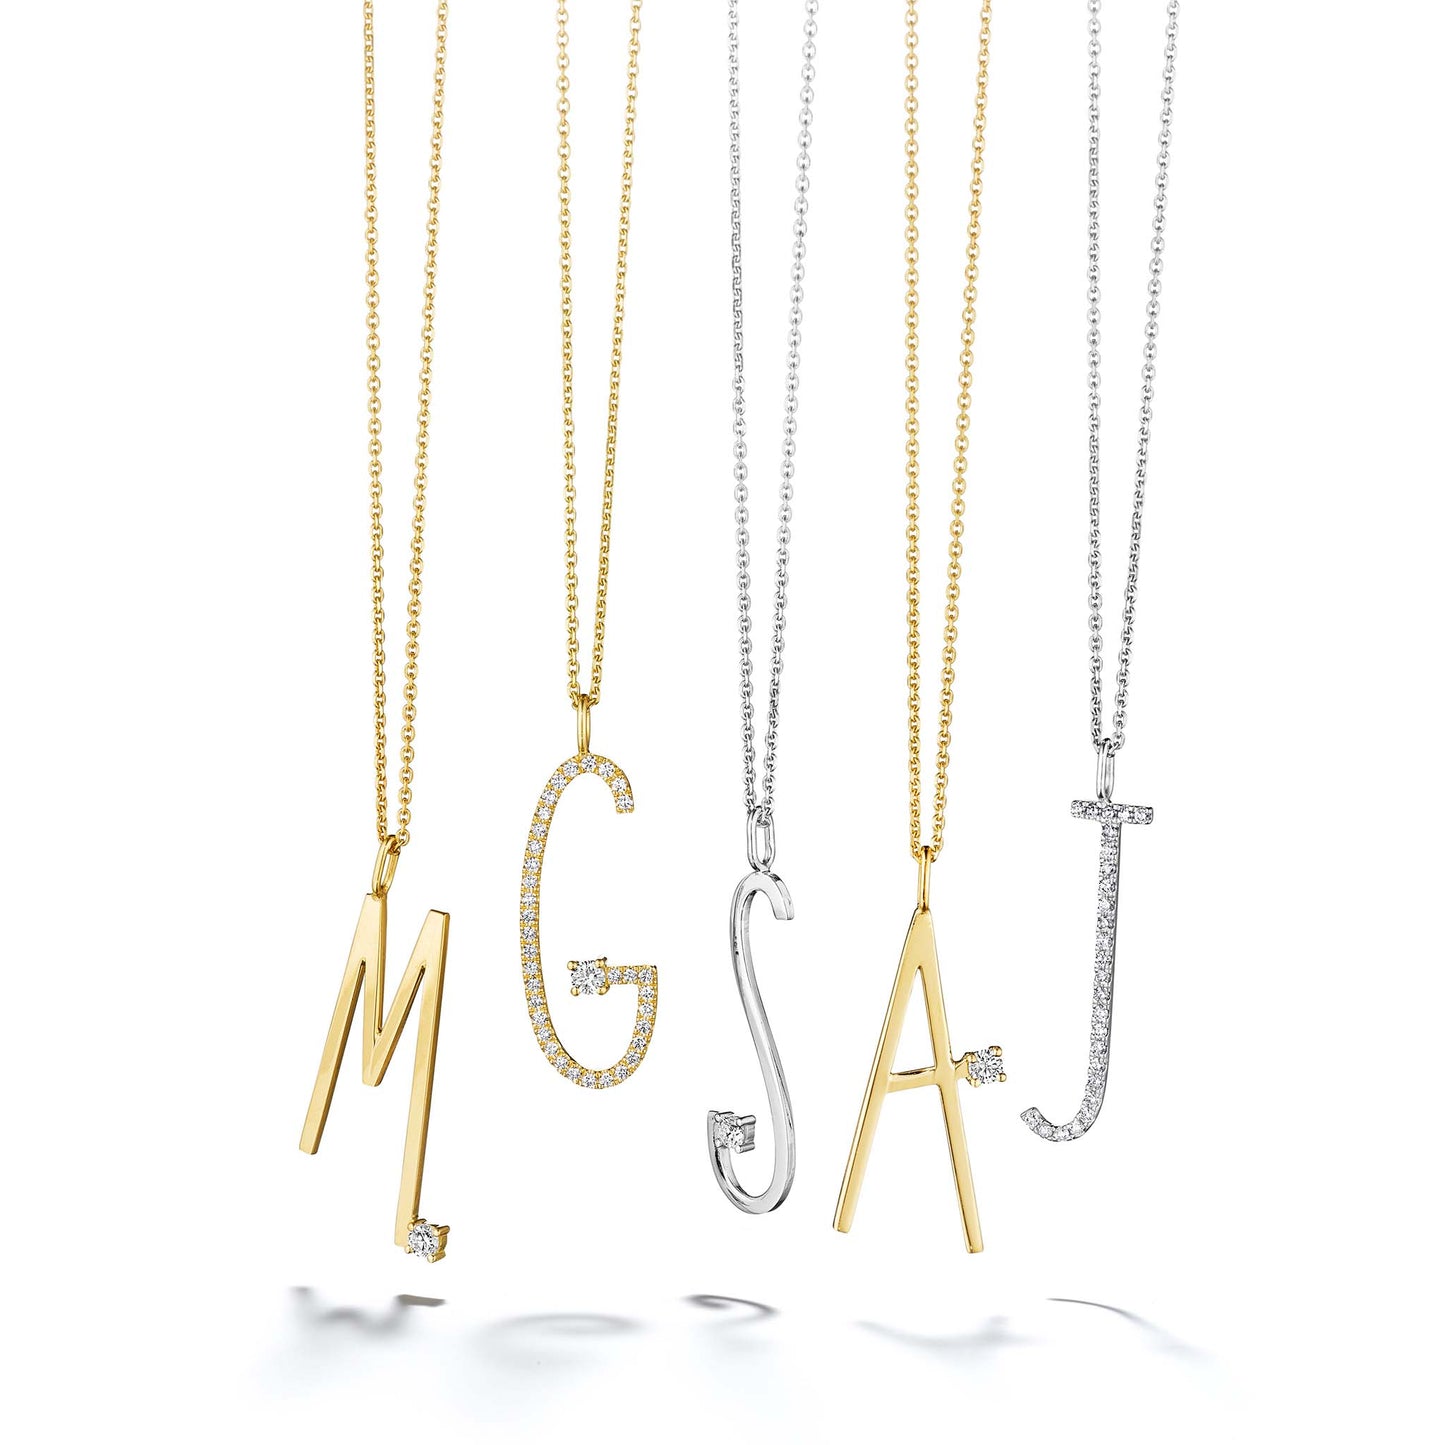 Mimi So Type Letter Necklaces Group